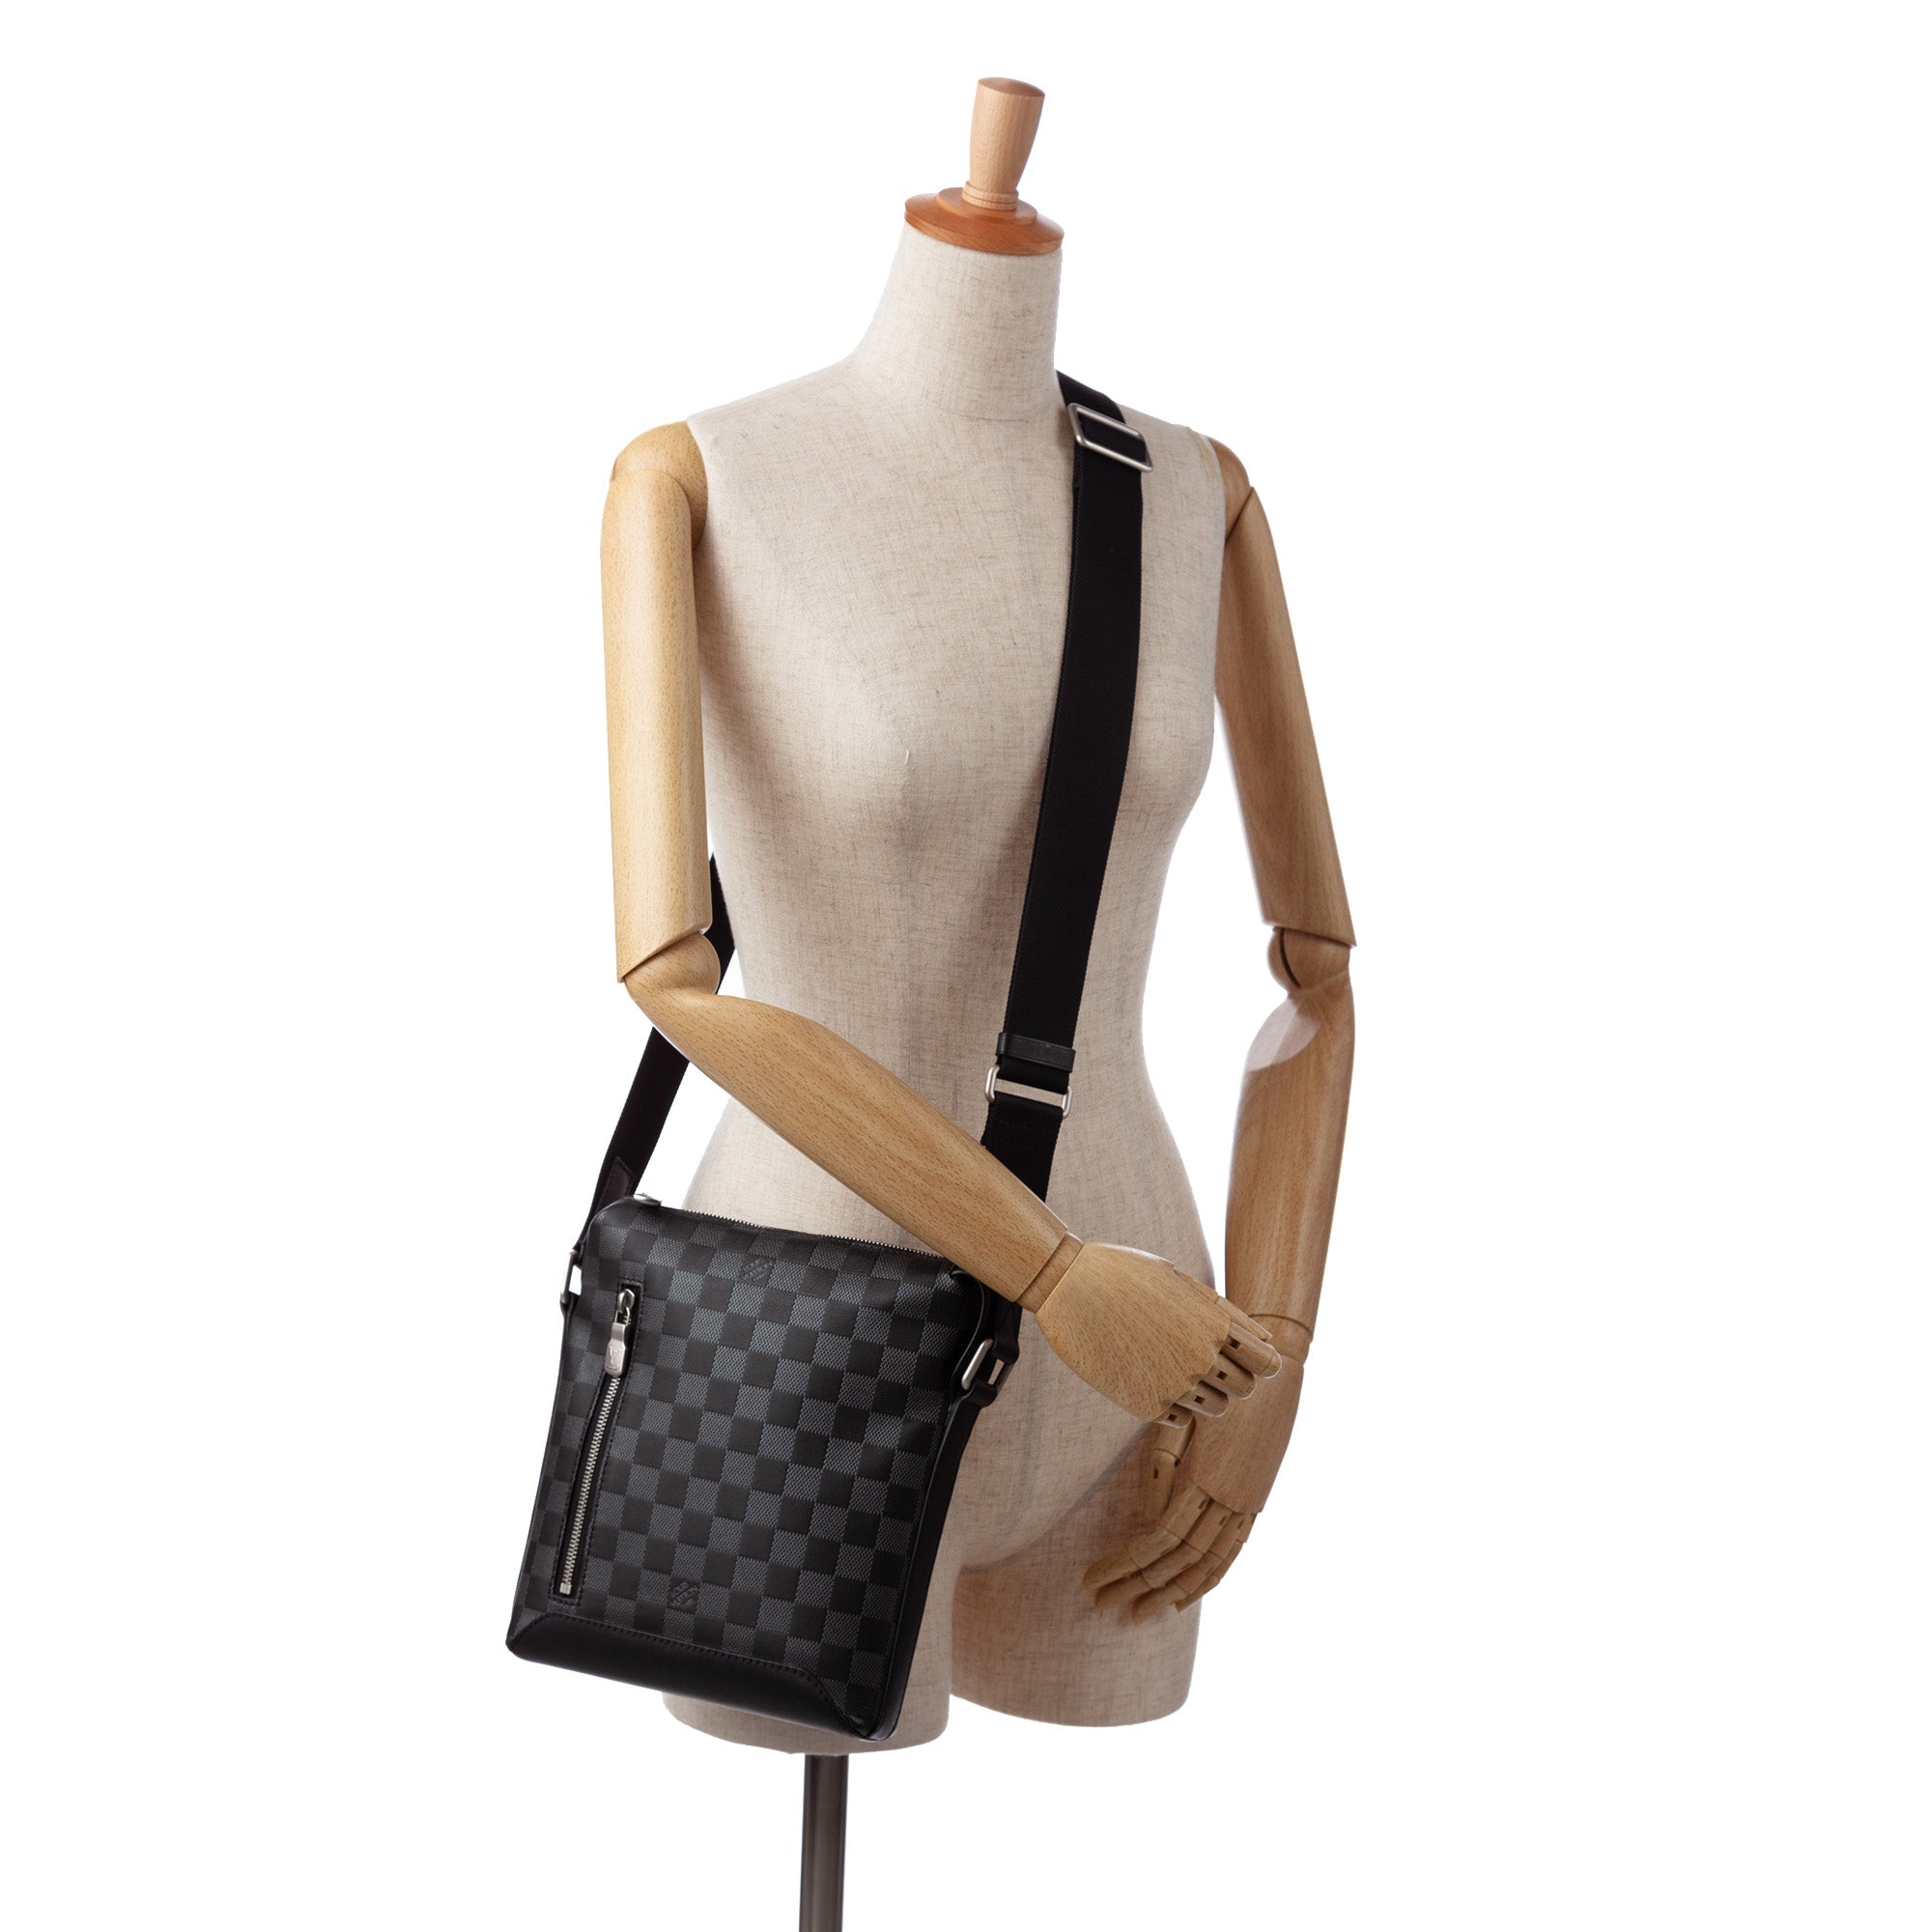 Louis Vuitton Discovery Bb Damier Infini Messenger Crossbody Bag in Black | Lord & Taylor